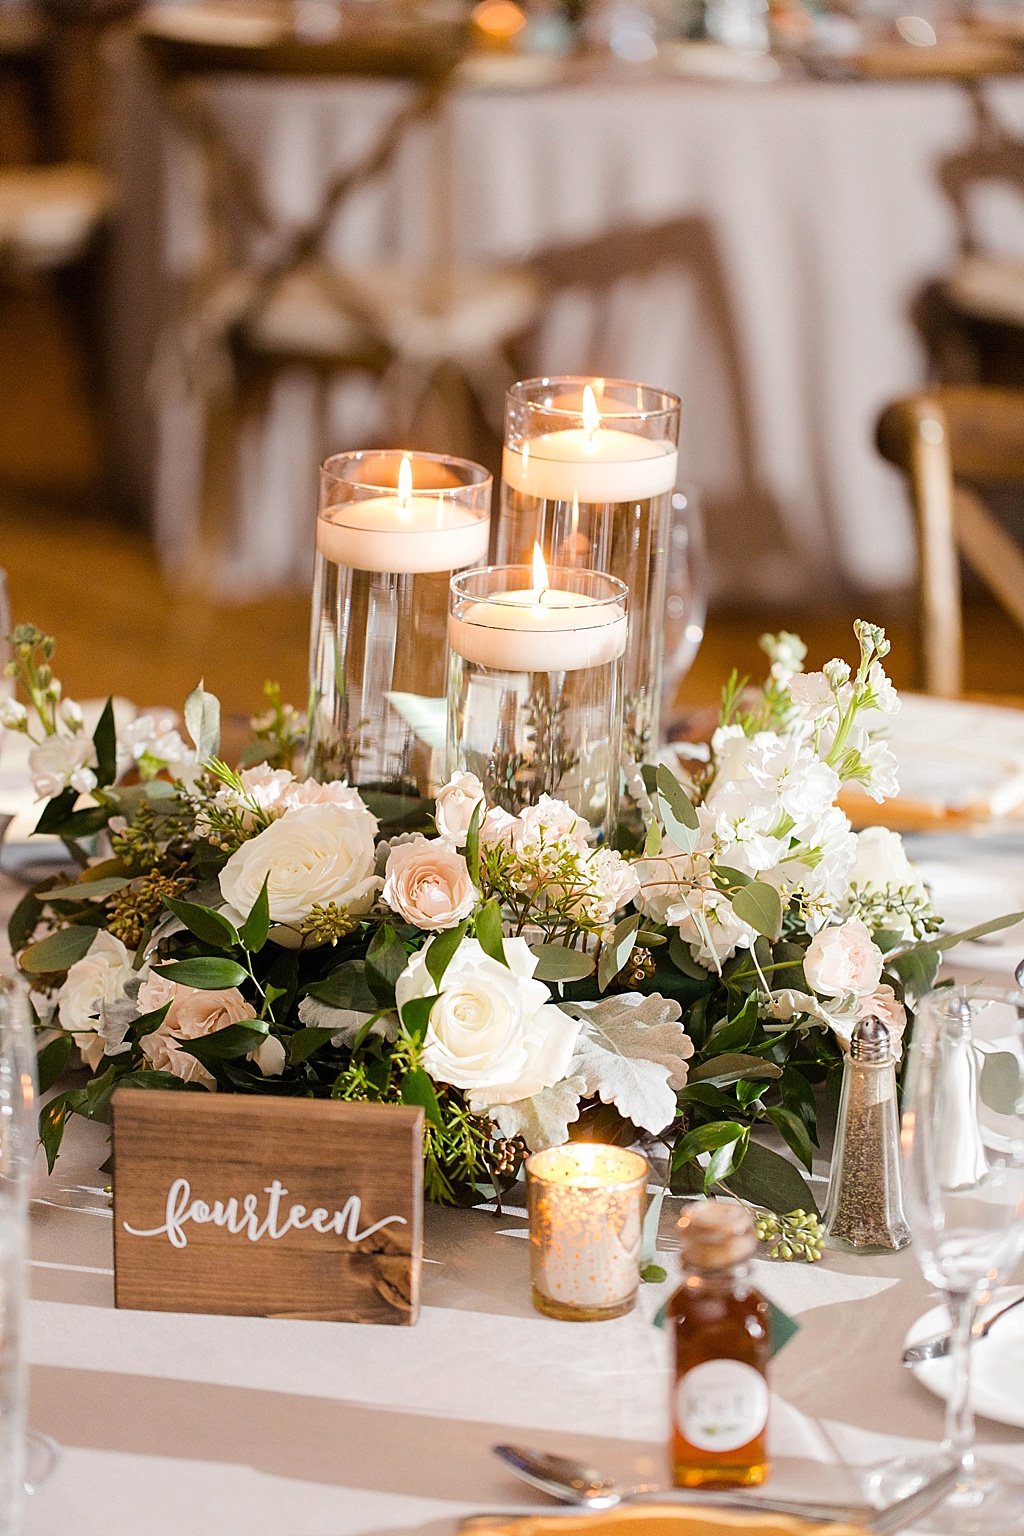 Rustic Elegant Wedding Reception Decor, White, Blush Pink, Ivory and Greenery Centerpiece with Tall Glass Cylinder Floating Candles and Wooden Table Number Sign